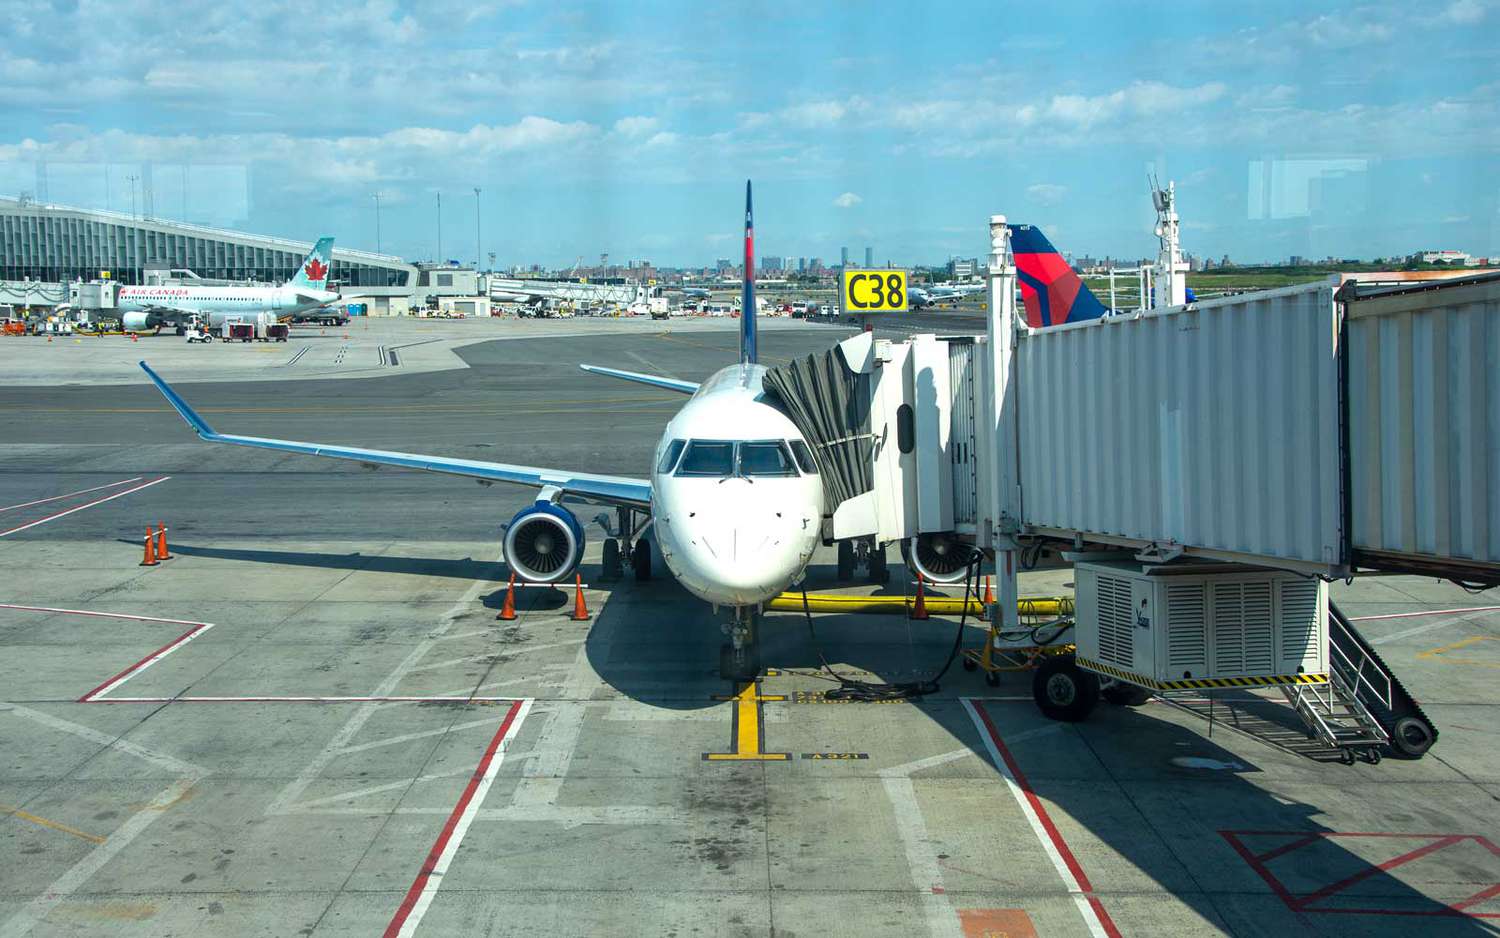 Delta Airplane At the gate